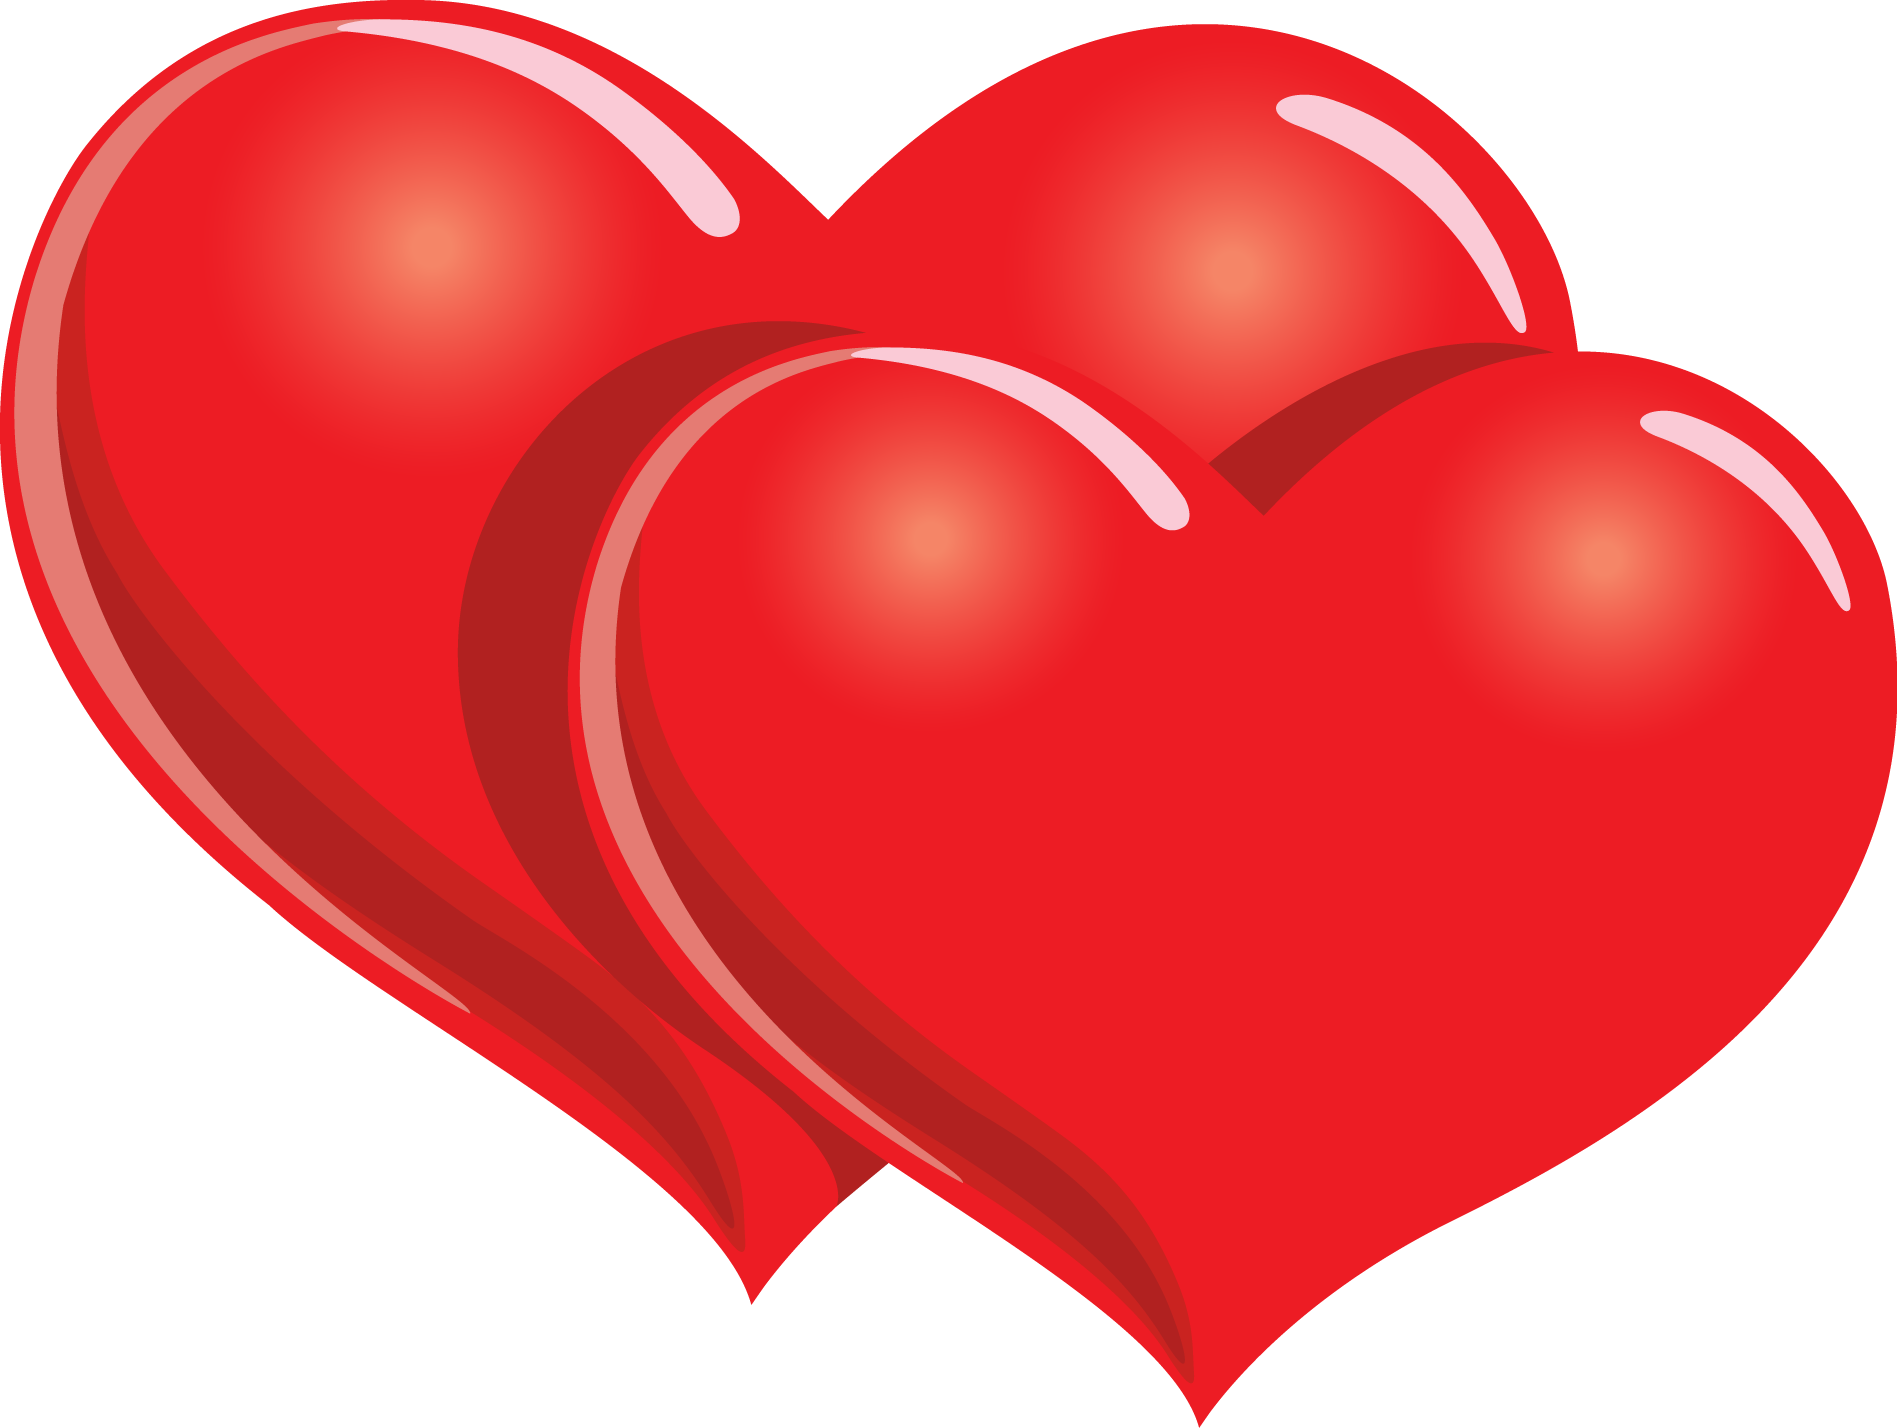 Free 3d Heart Pictures Download Free Clip Art Free Clip Art On Clipart Library